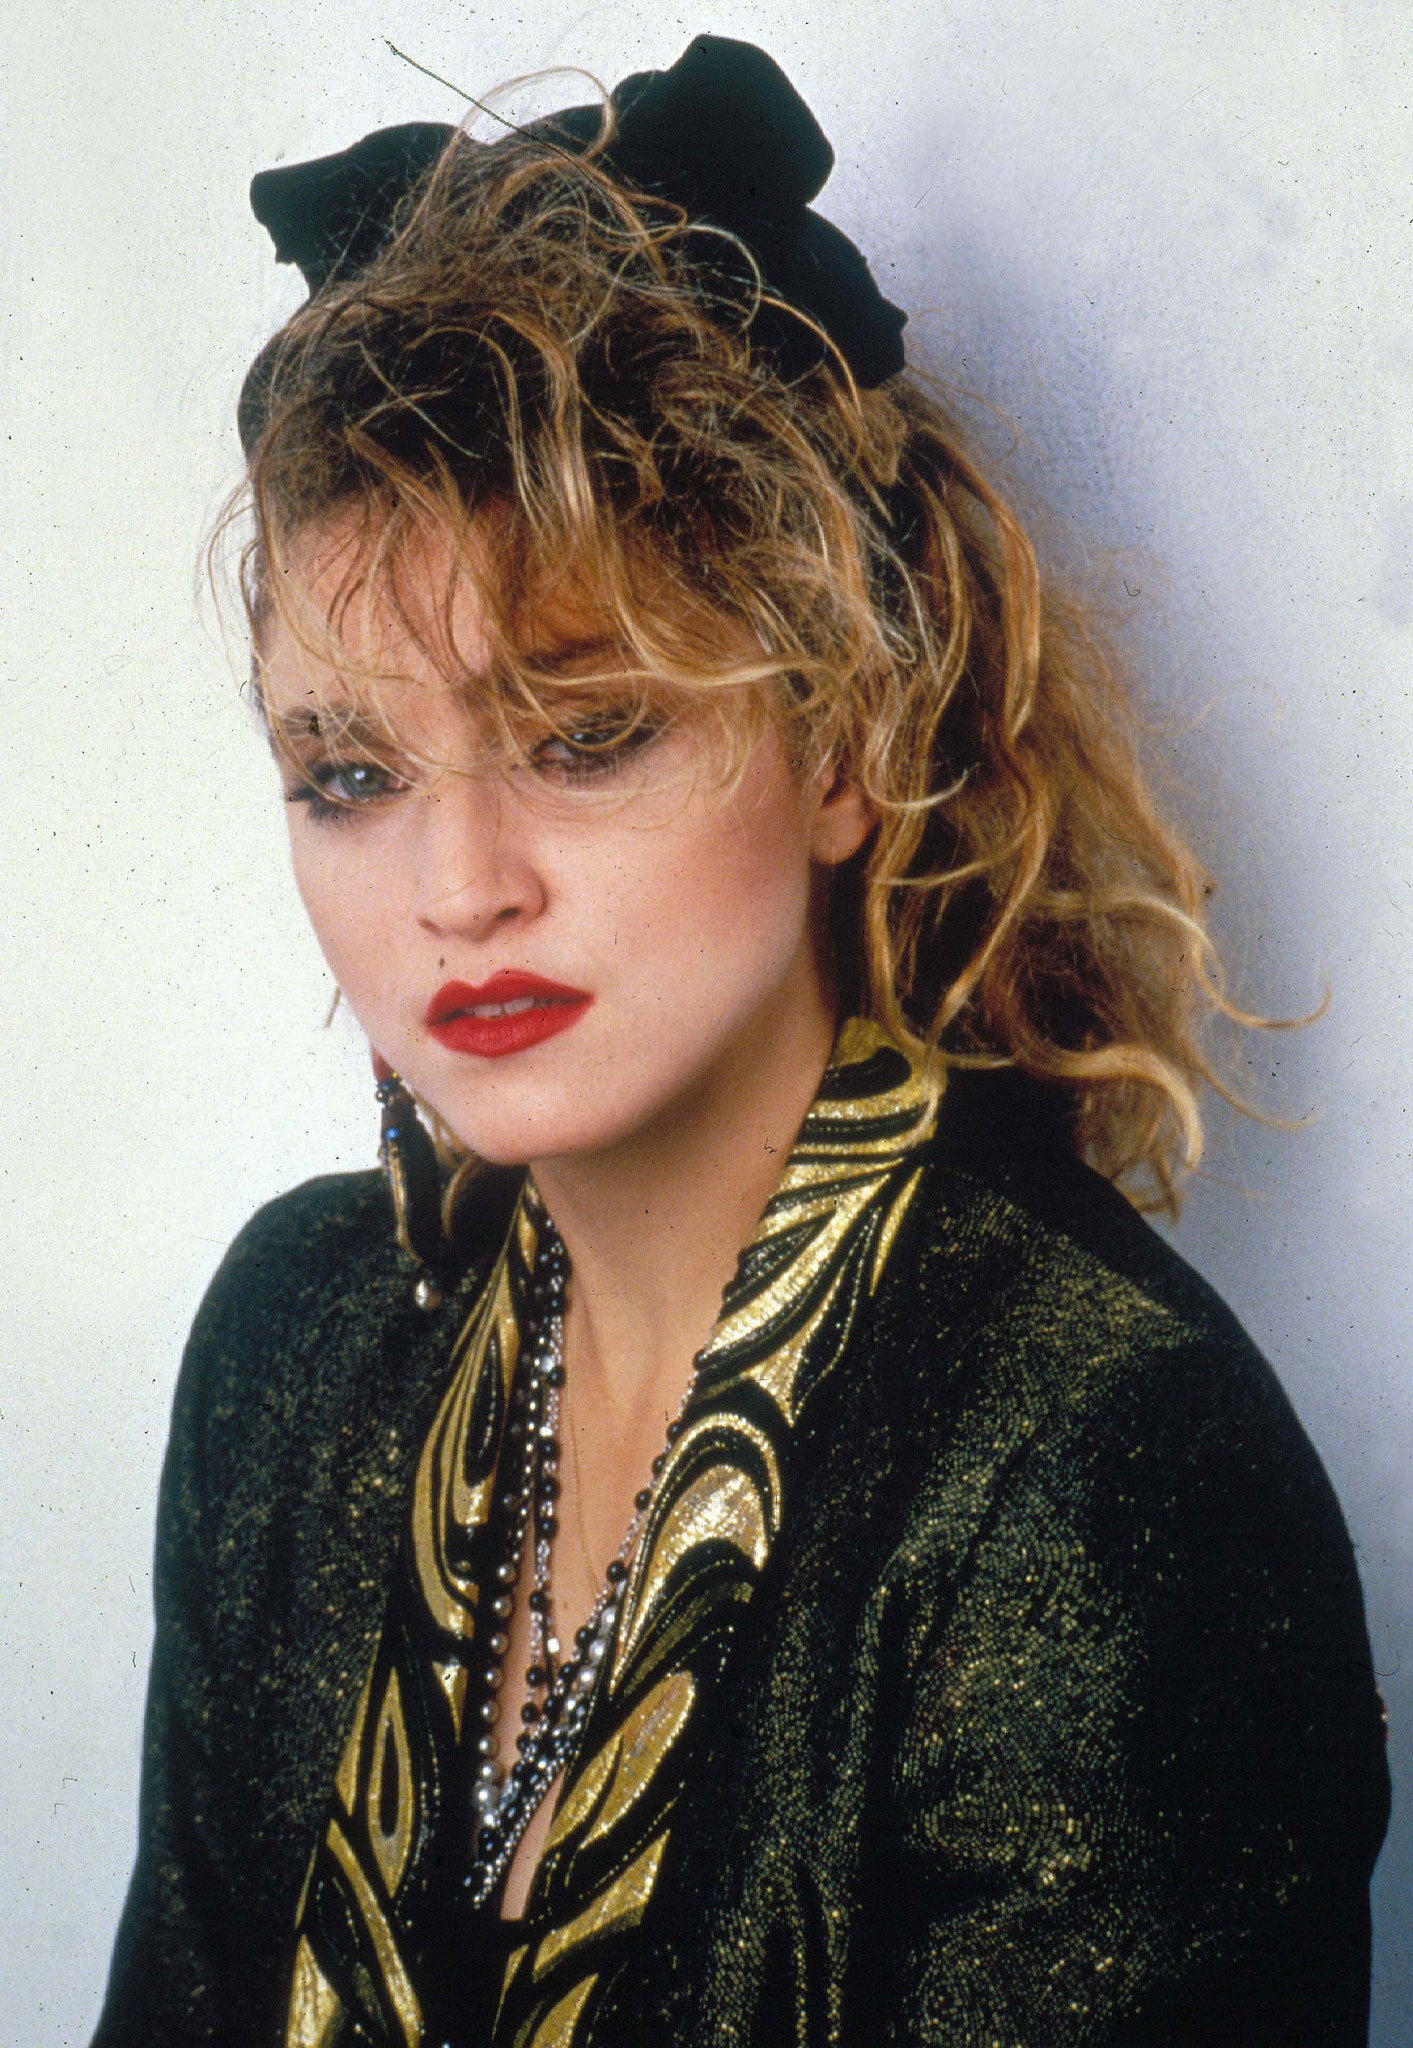 'Into the Groove' by Madonna: From Desperately Seeking Susan, 1985